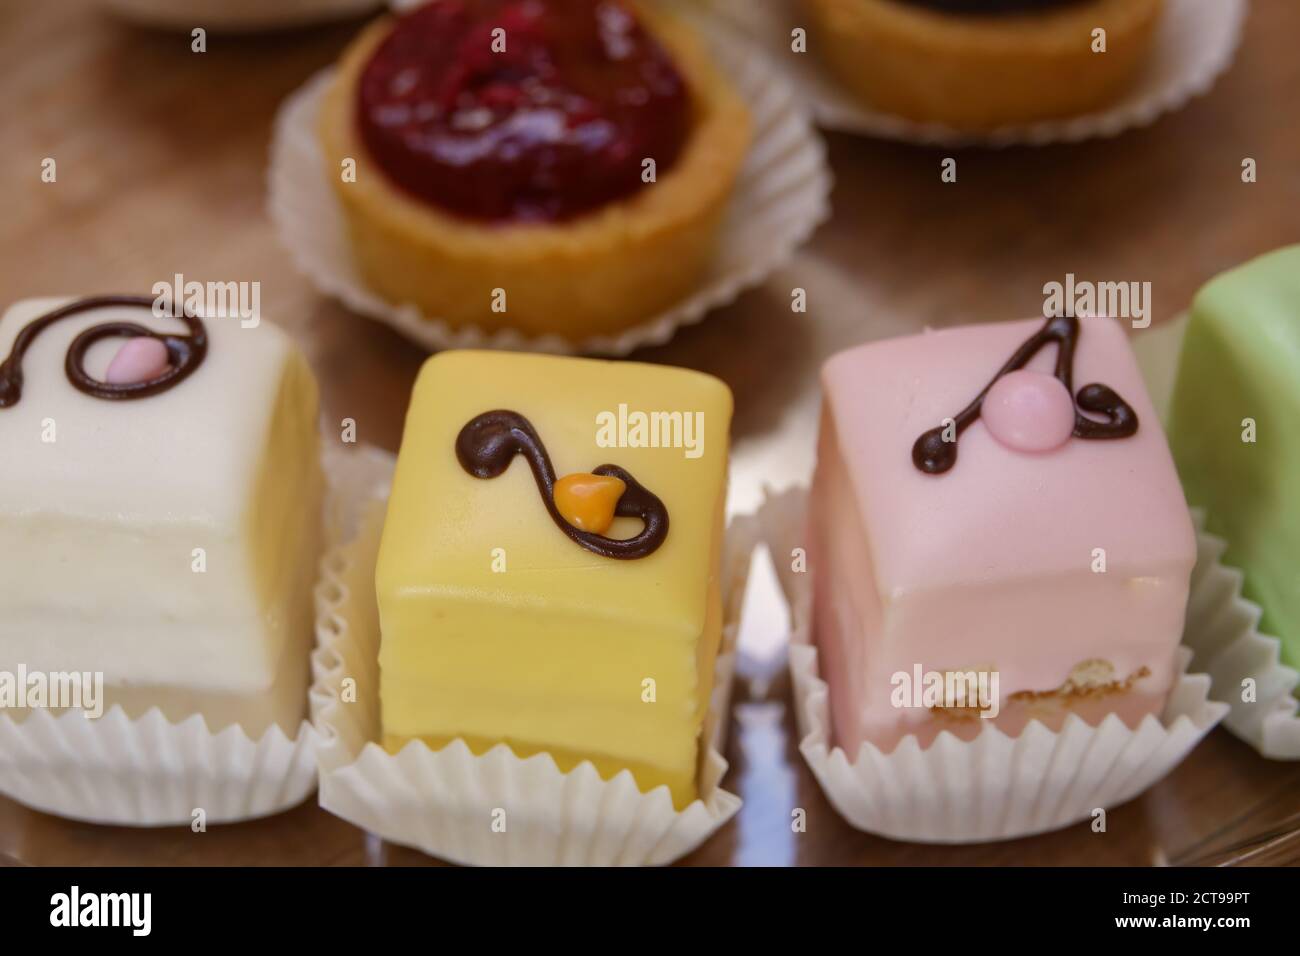 Iced mini cakes named Petit four glace. Delicious for a high tea or as dessert. Stock Photo